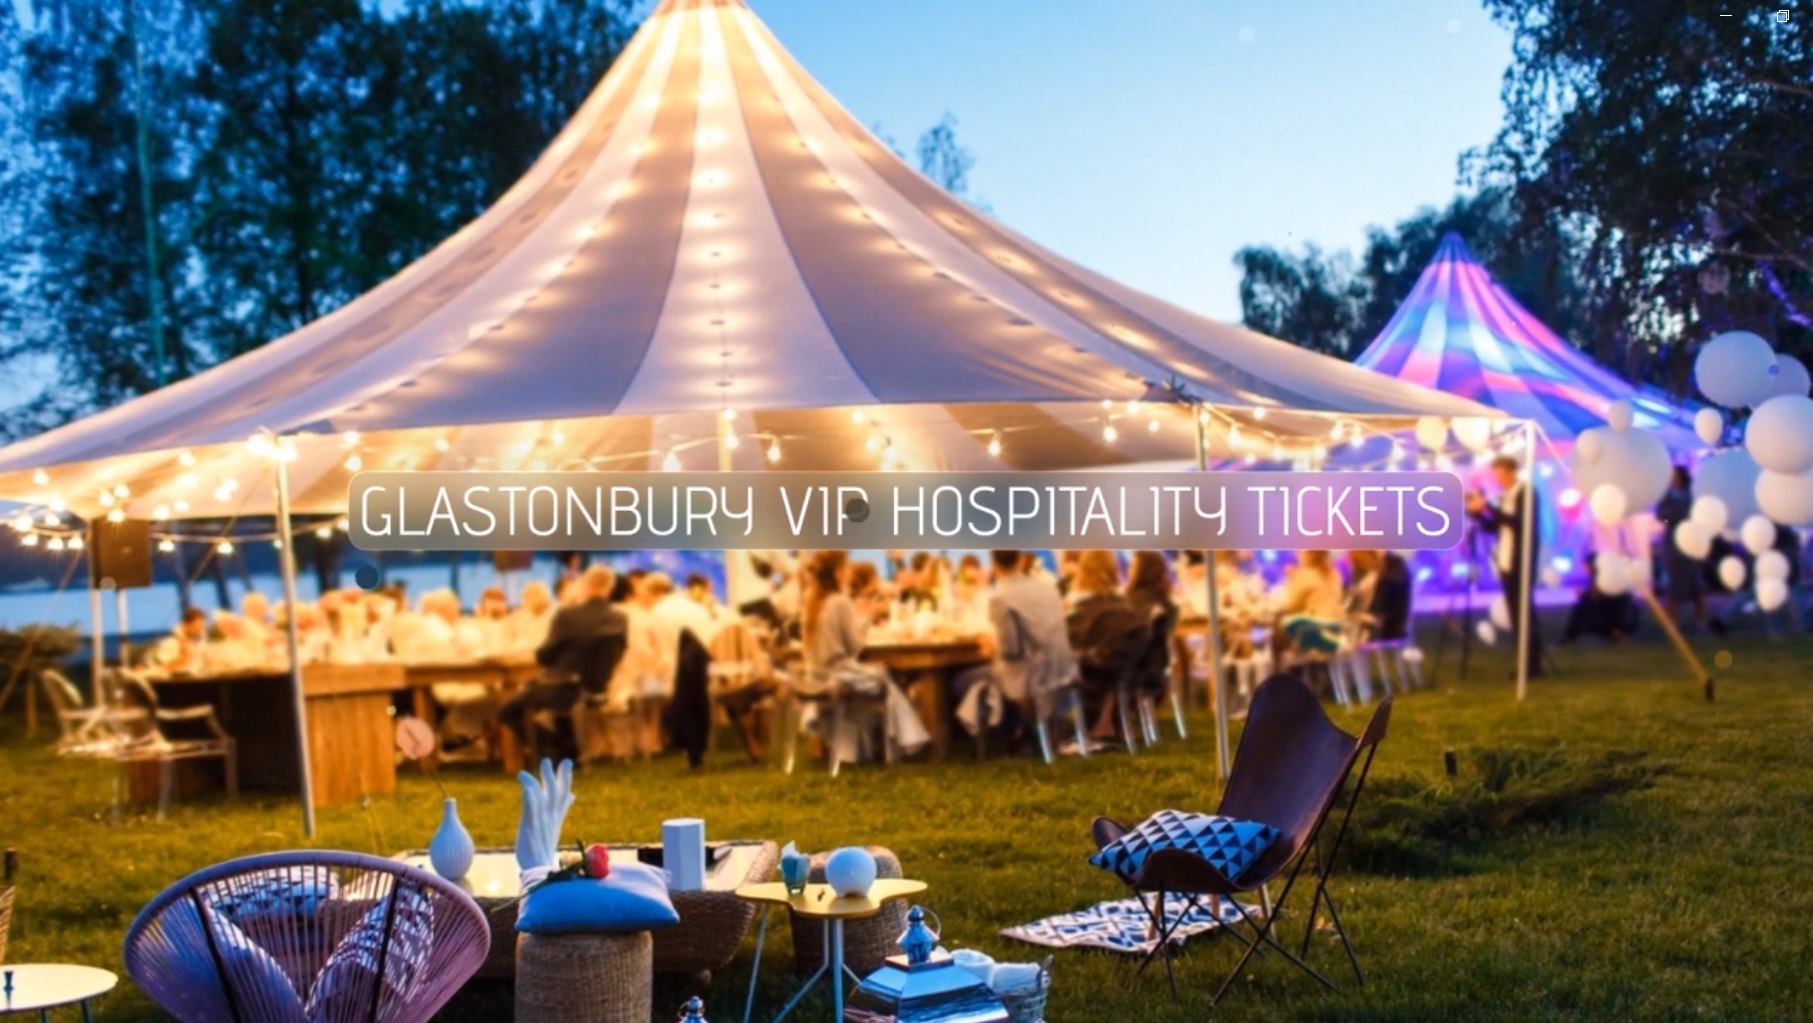 buy artist passes and corporate hopspitality at glastonbury festival